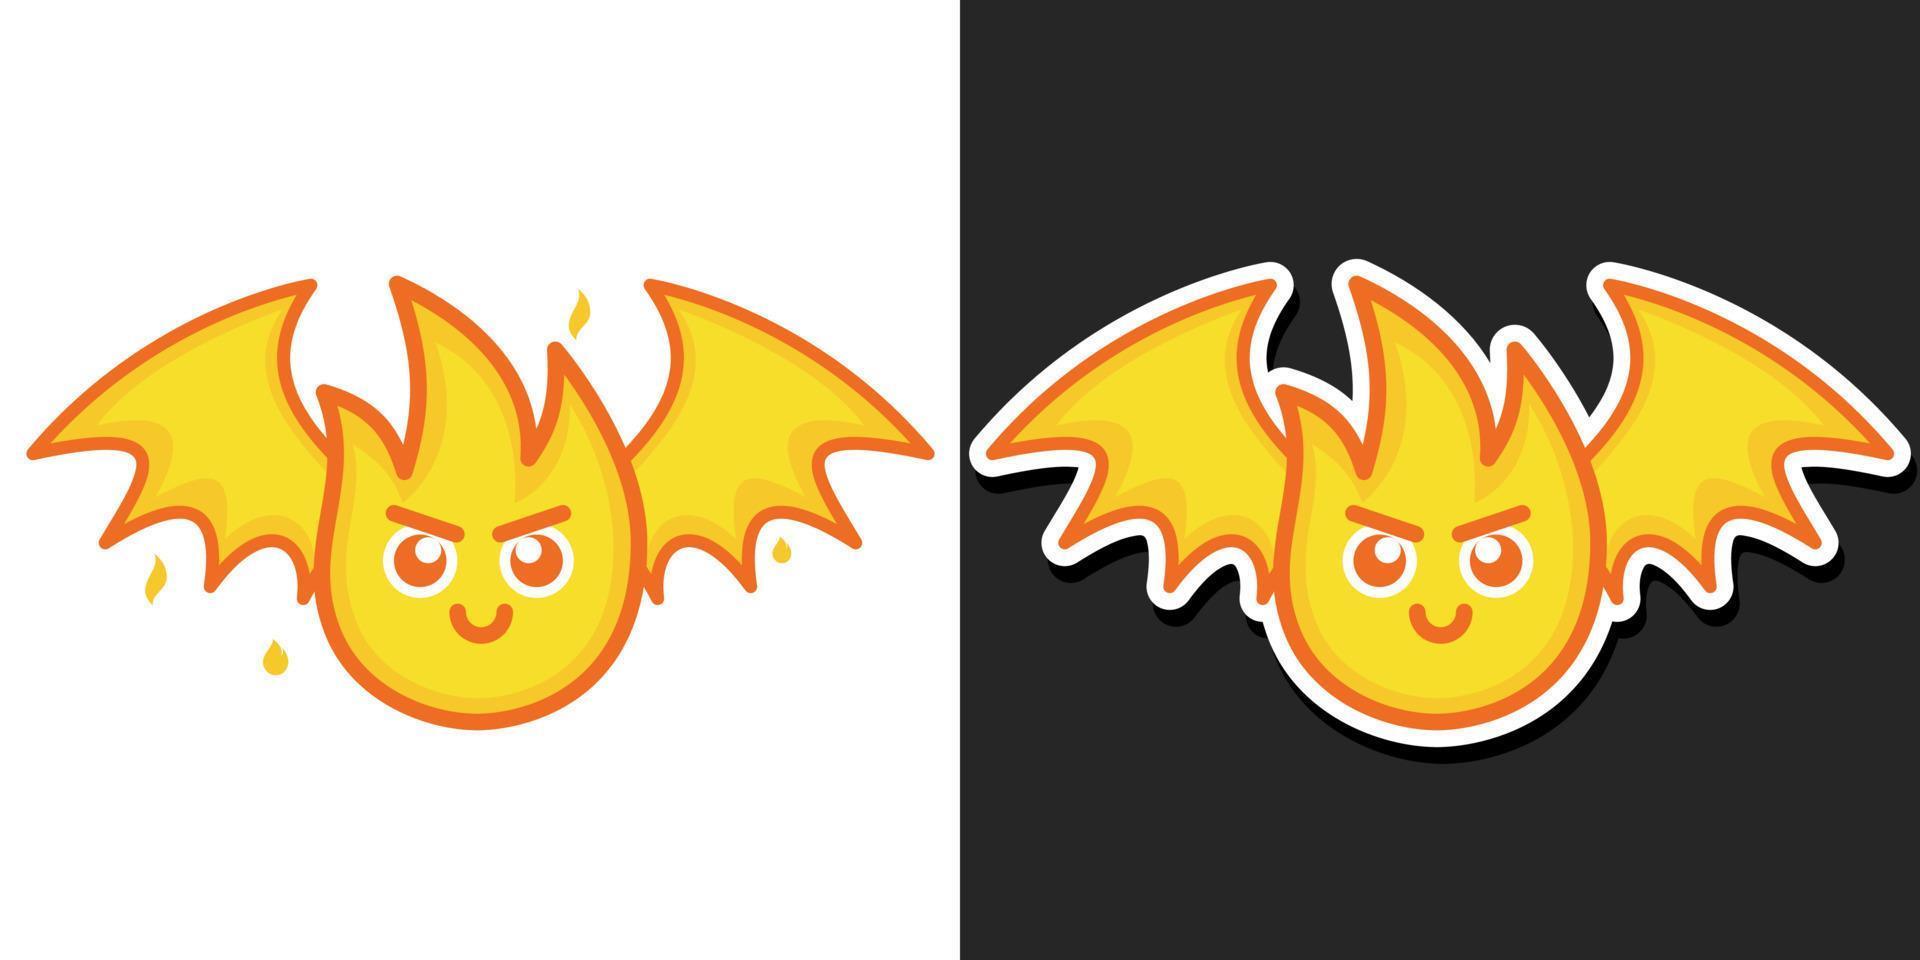 Wings of fire kawaii cartoon vector icon concept. Flat illustration style for mascot, sticker, logo and icon.